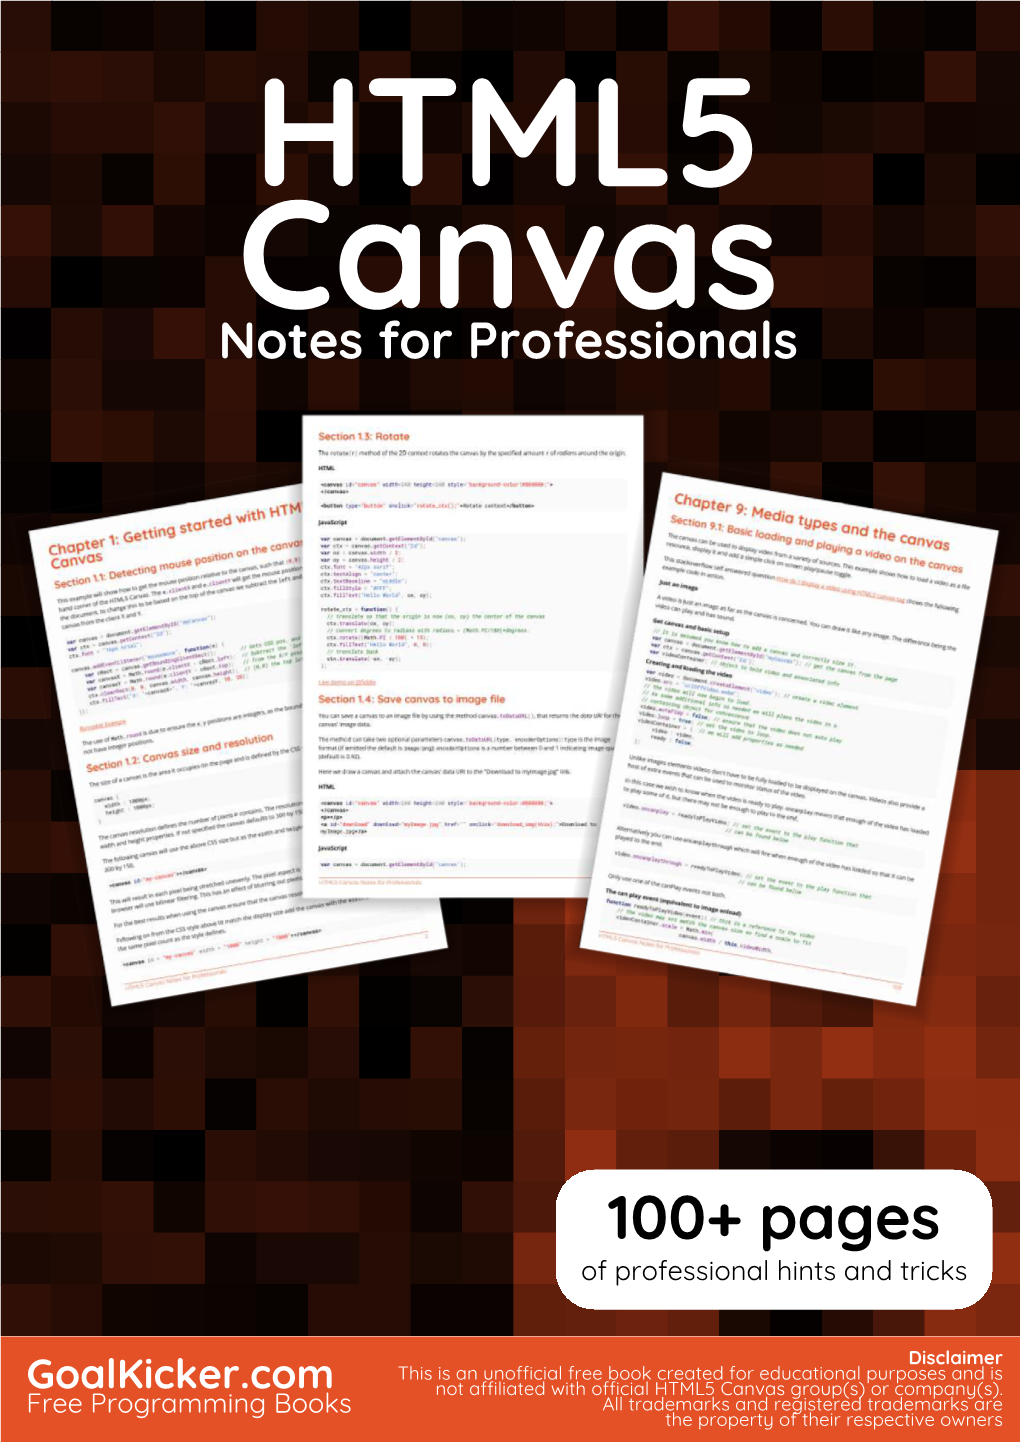 HTML5 Canvas Notes for Professionals Book Is Compiled from Stack Overﬂow Documentation, the Content Is Written by the Beautiful People at Stack Overﬂow